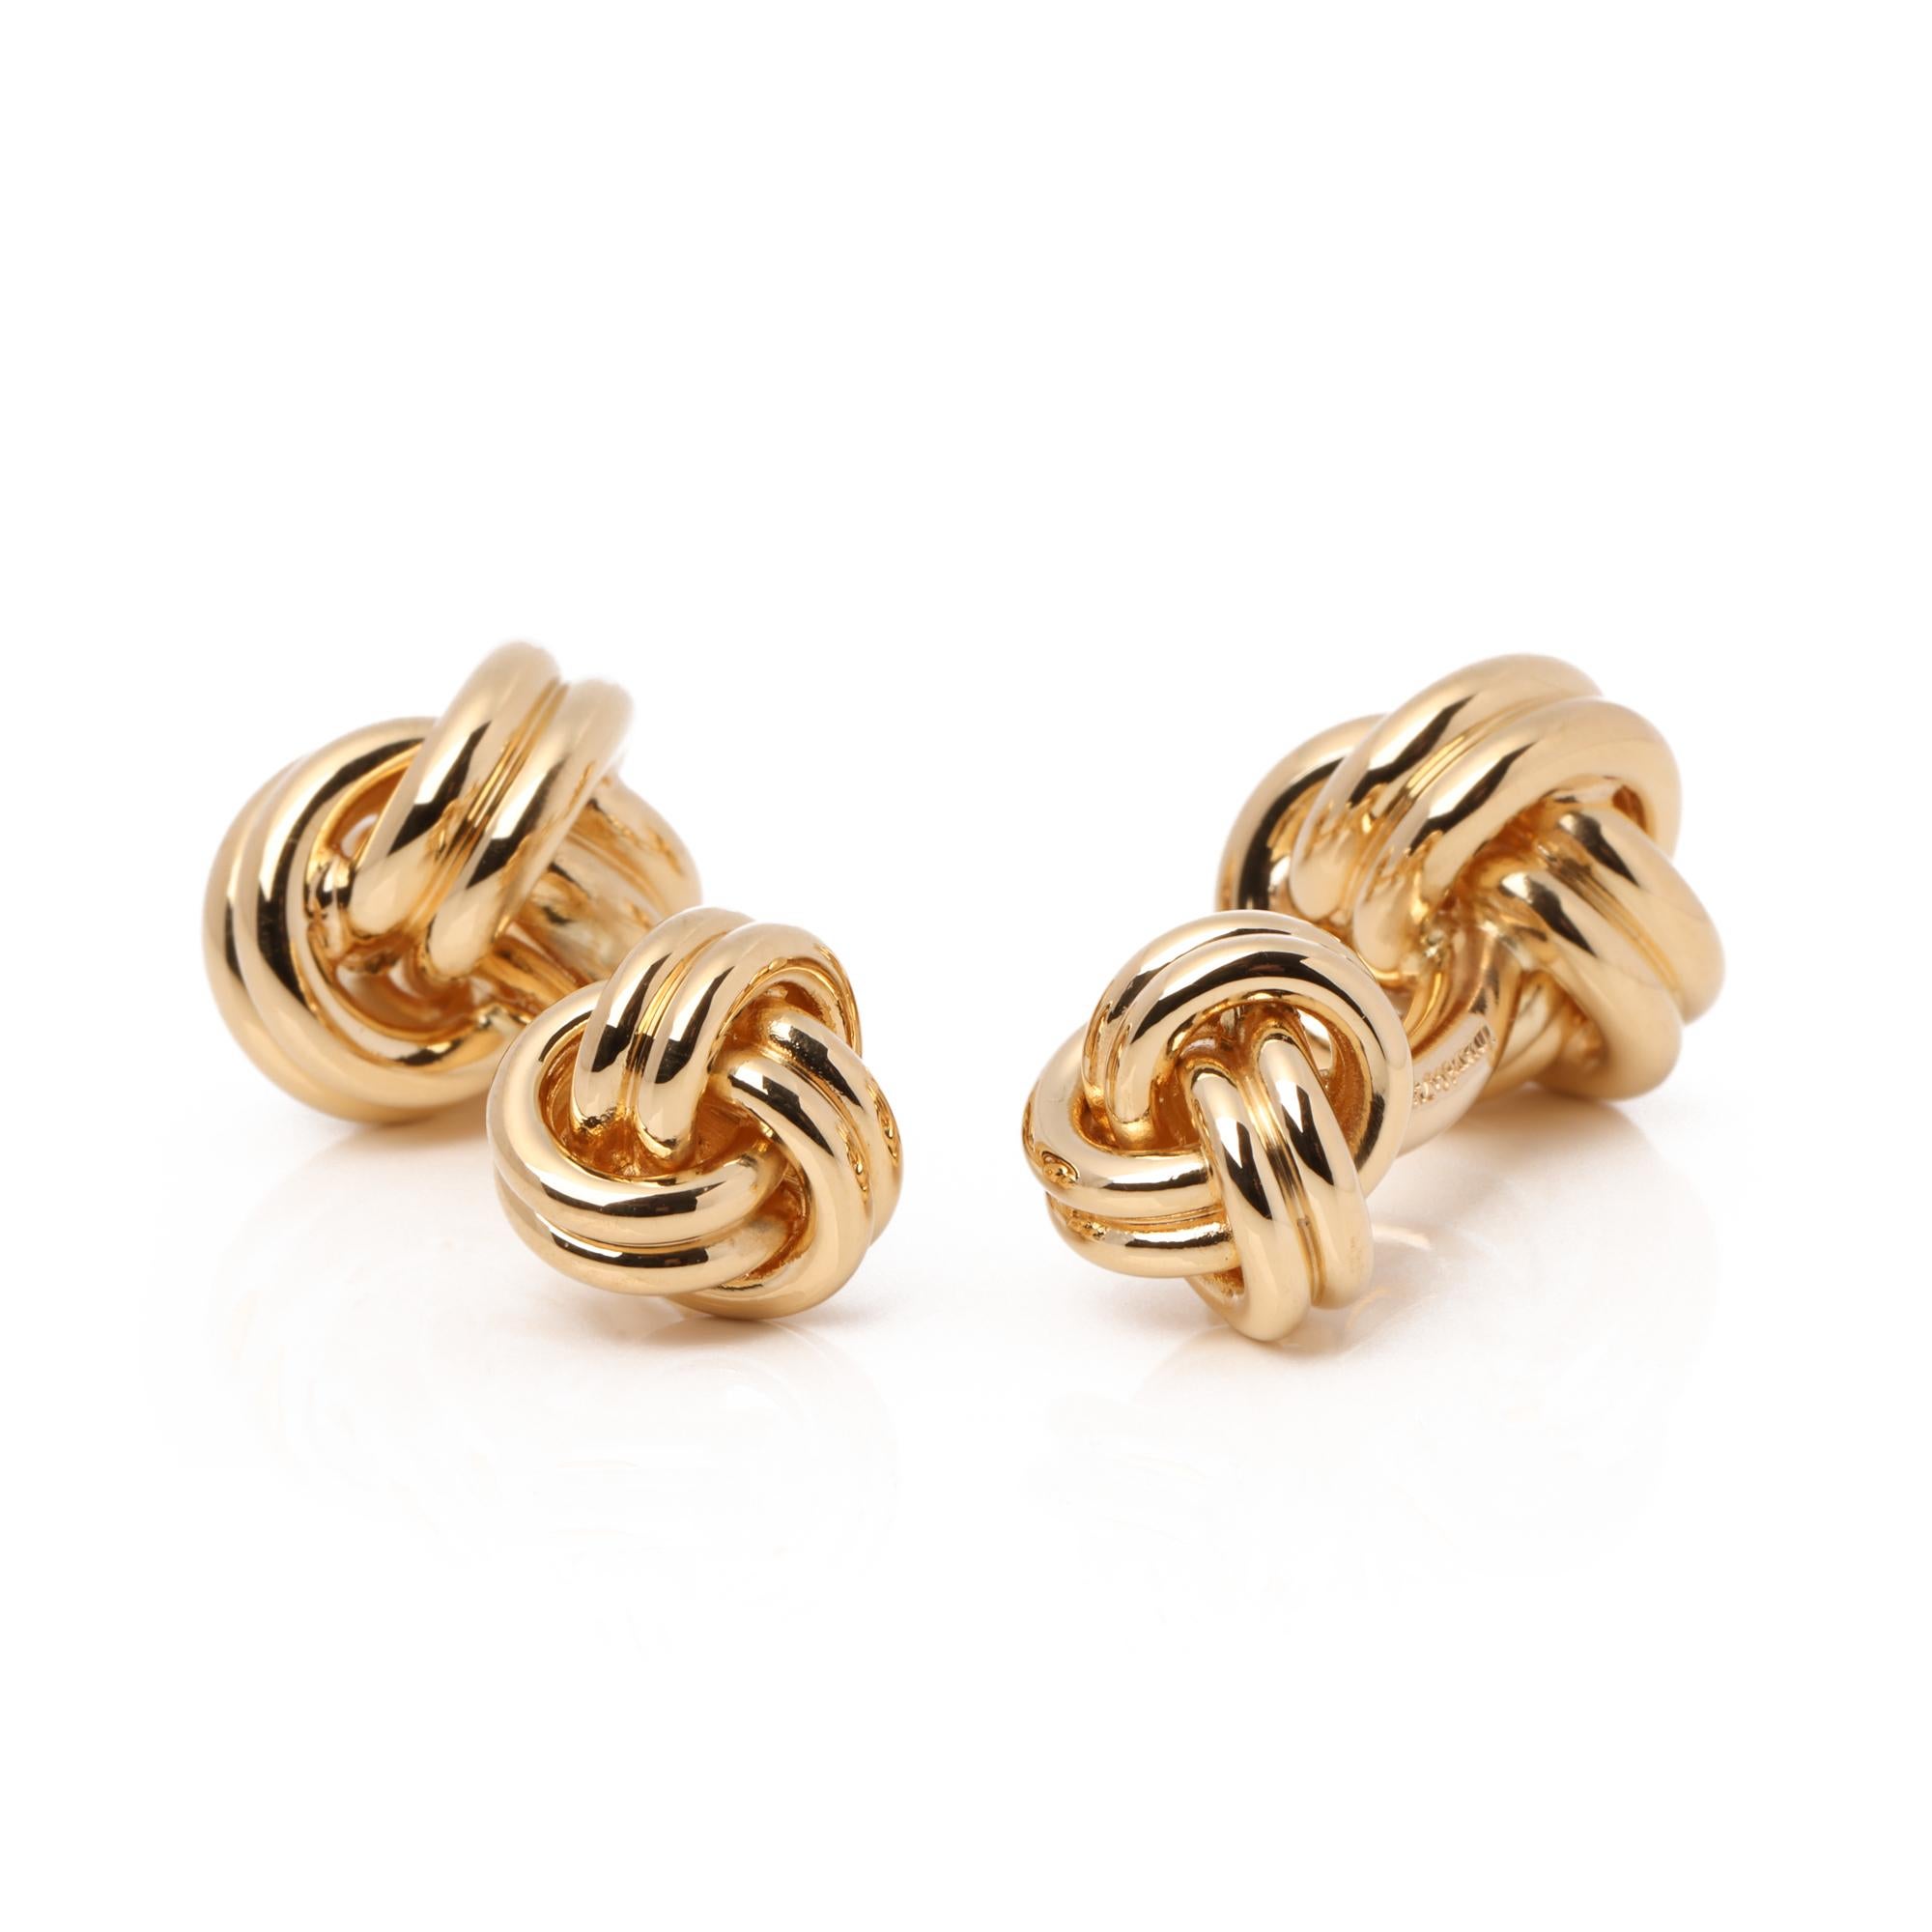 Contemporary Tiffany & Co. 18ct Yellow Gold Knot Cufflinks 